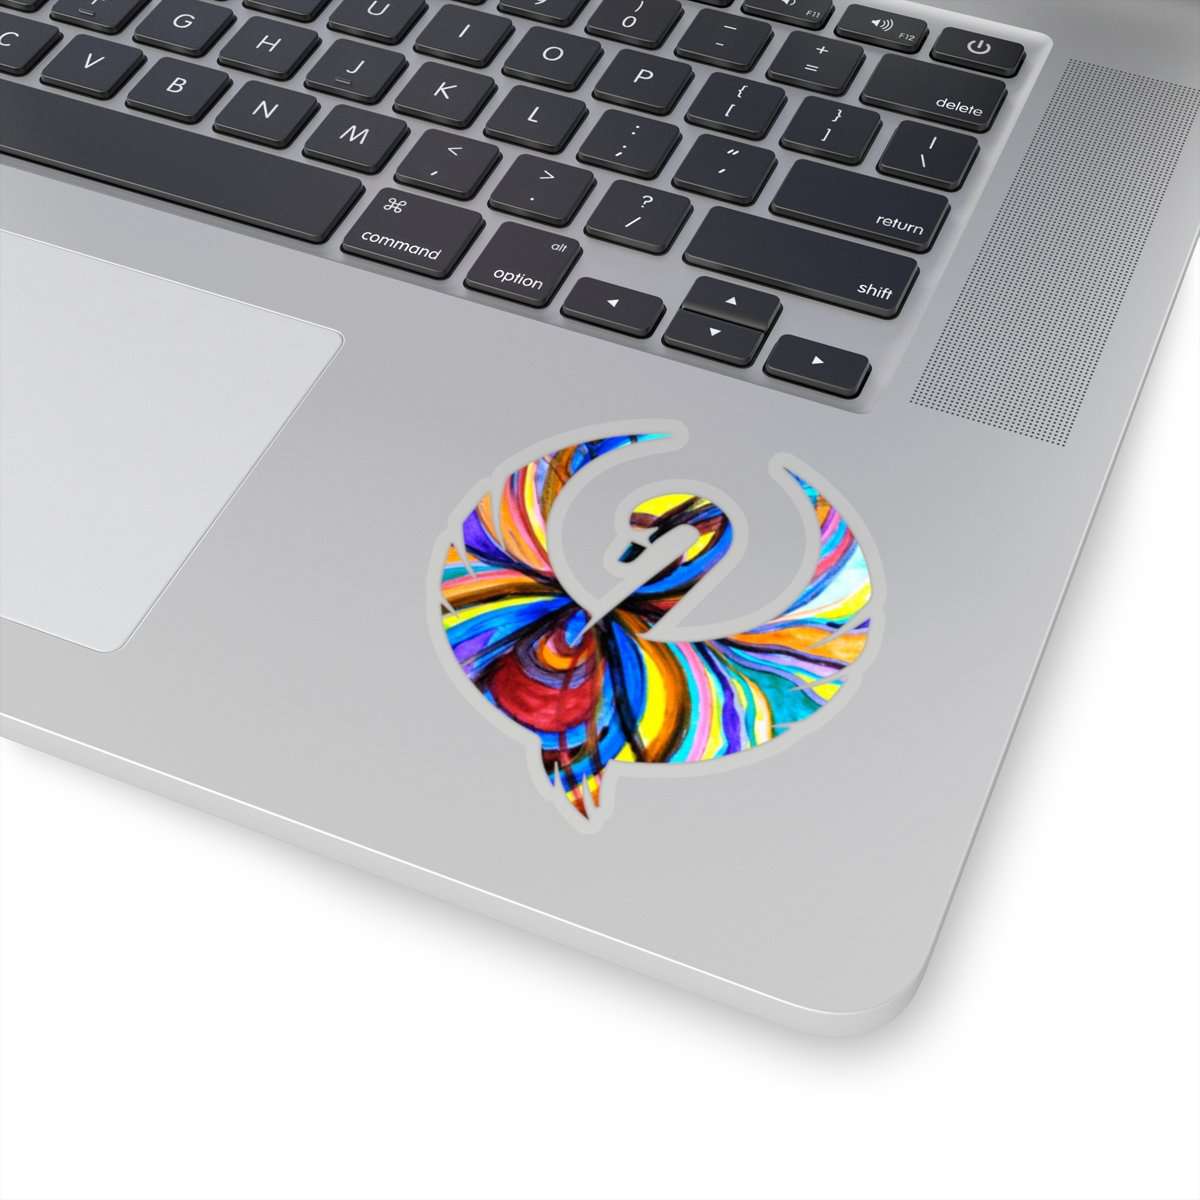 buy-and-sell-relationship-swan-stickers-online-now_5.jpg